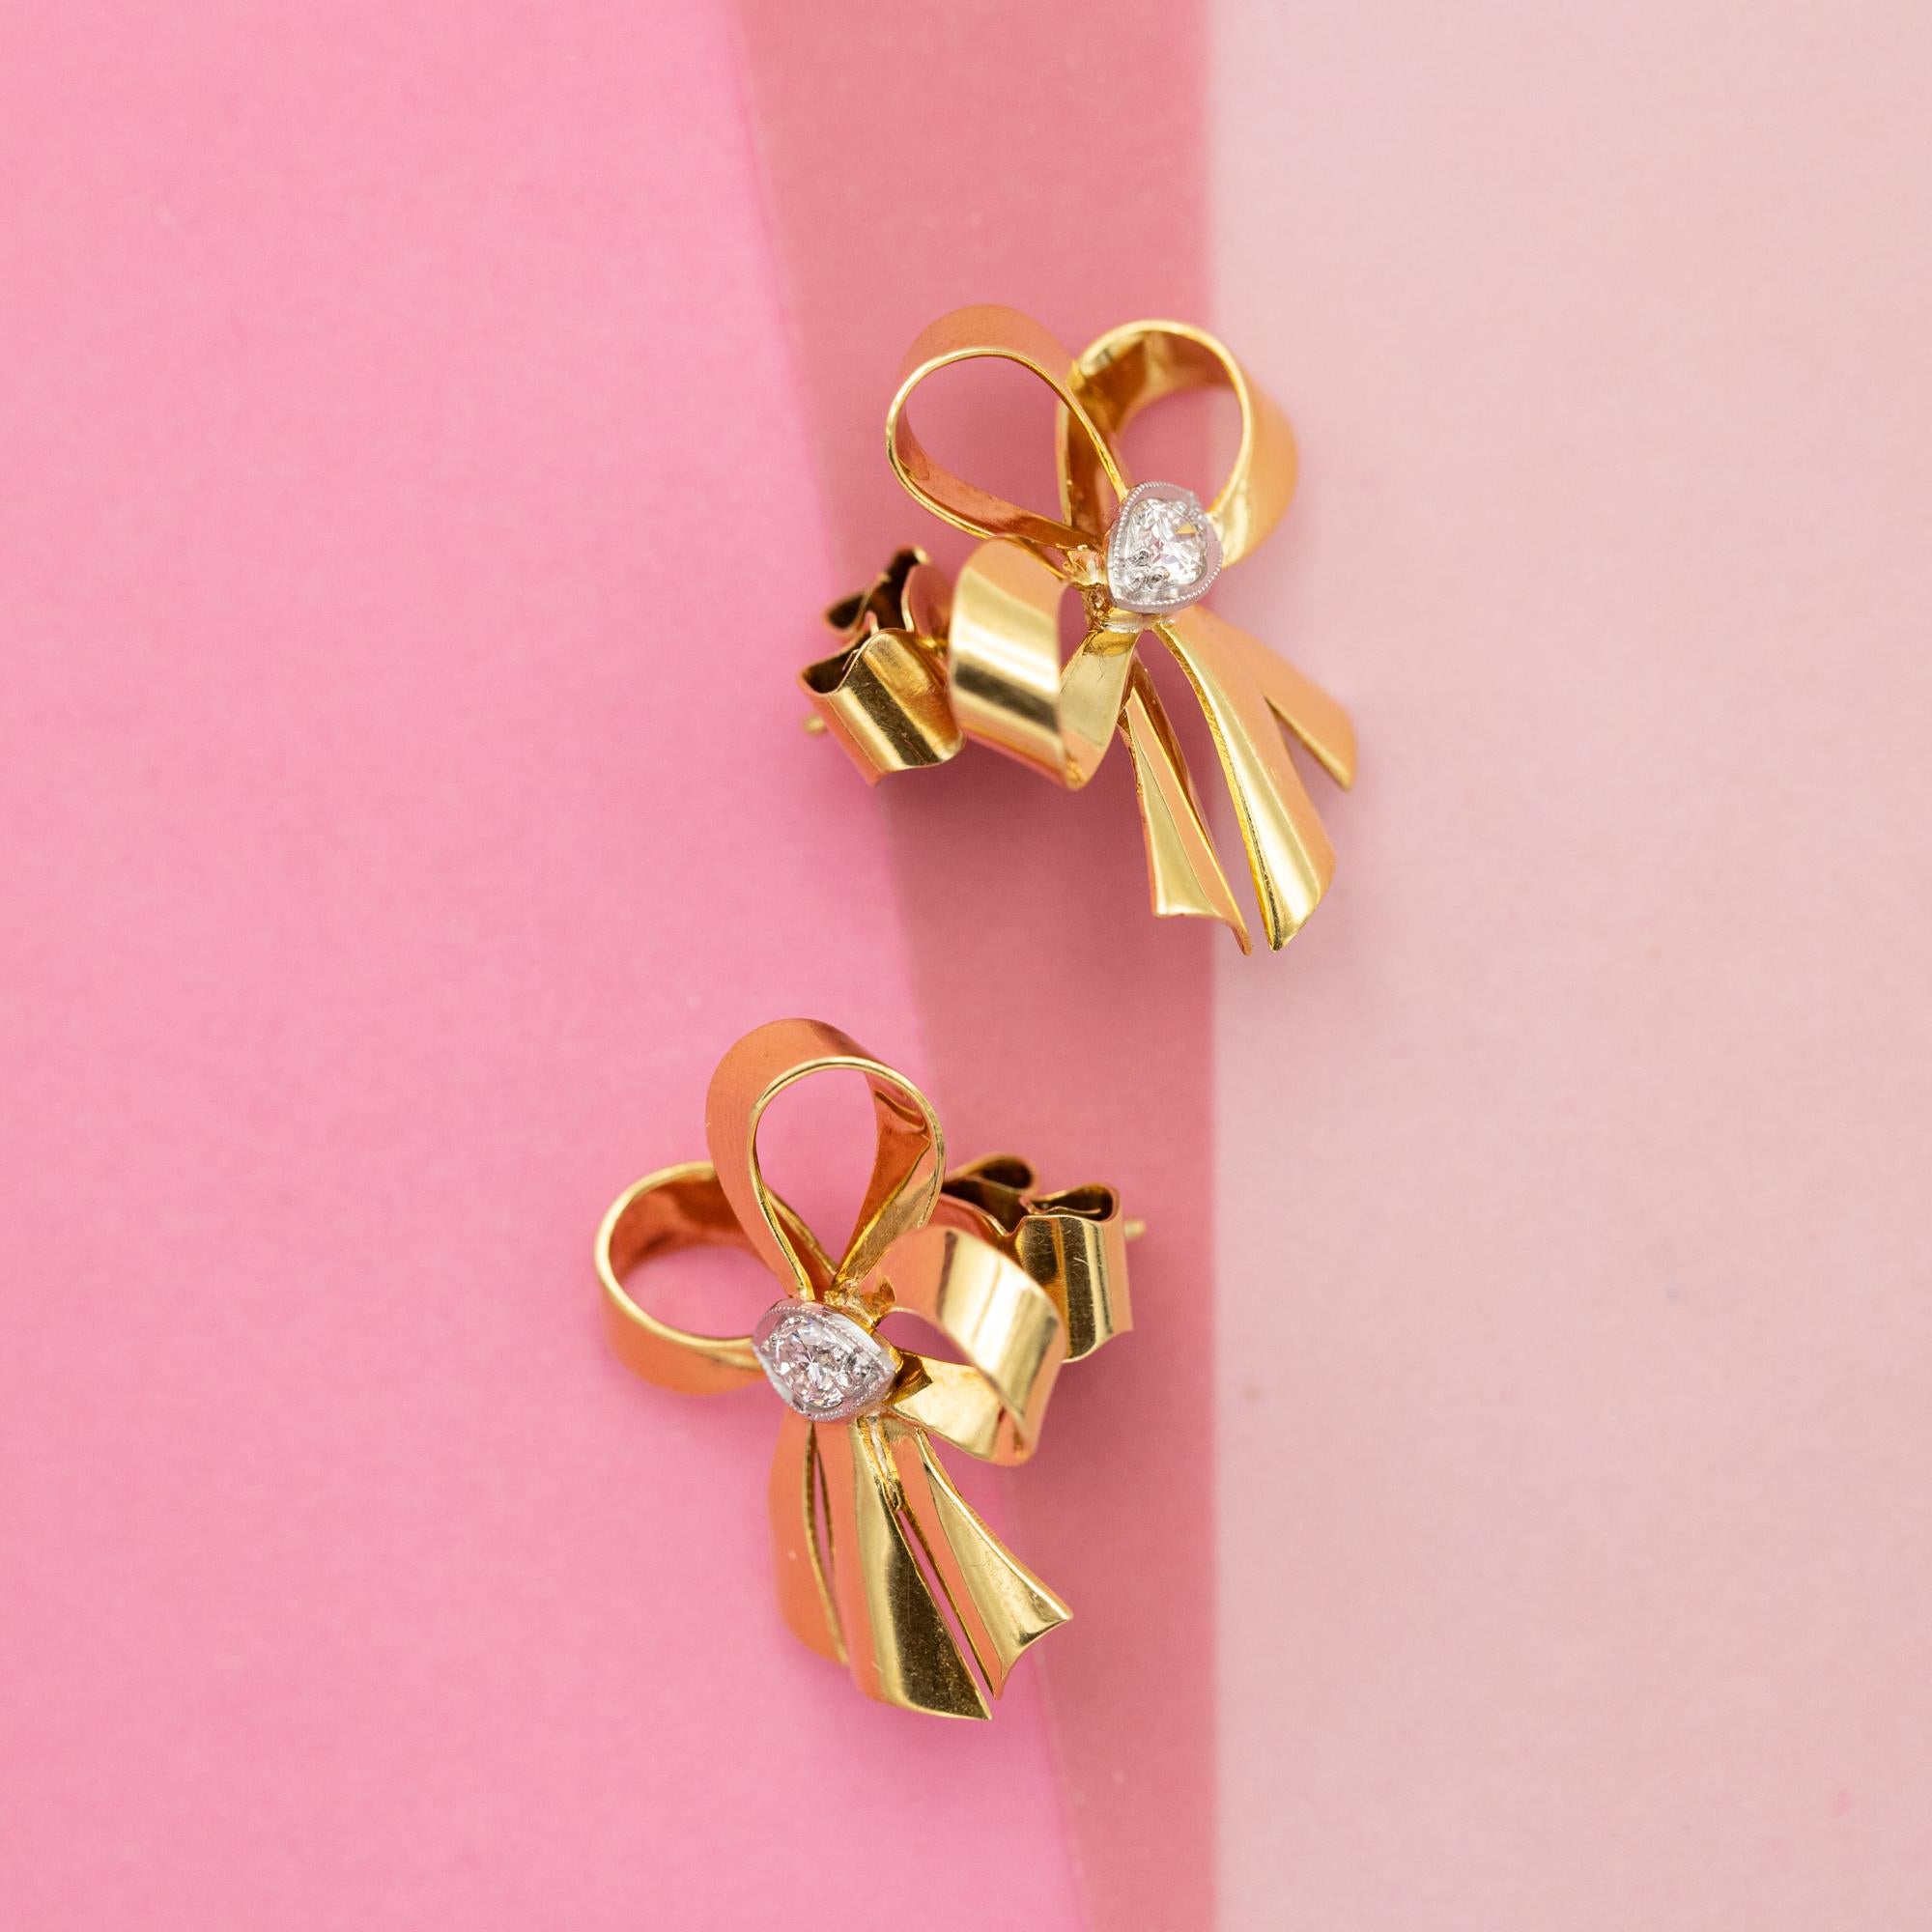 Women's or Men's 18K yellow gold stud earrings - floral Bow shaped studs - 1960's Diamond jewelry